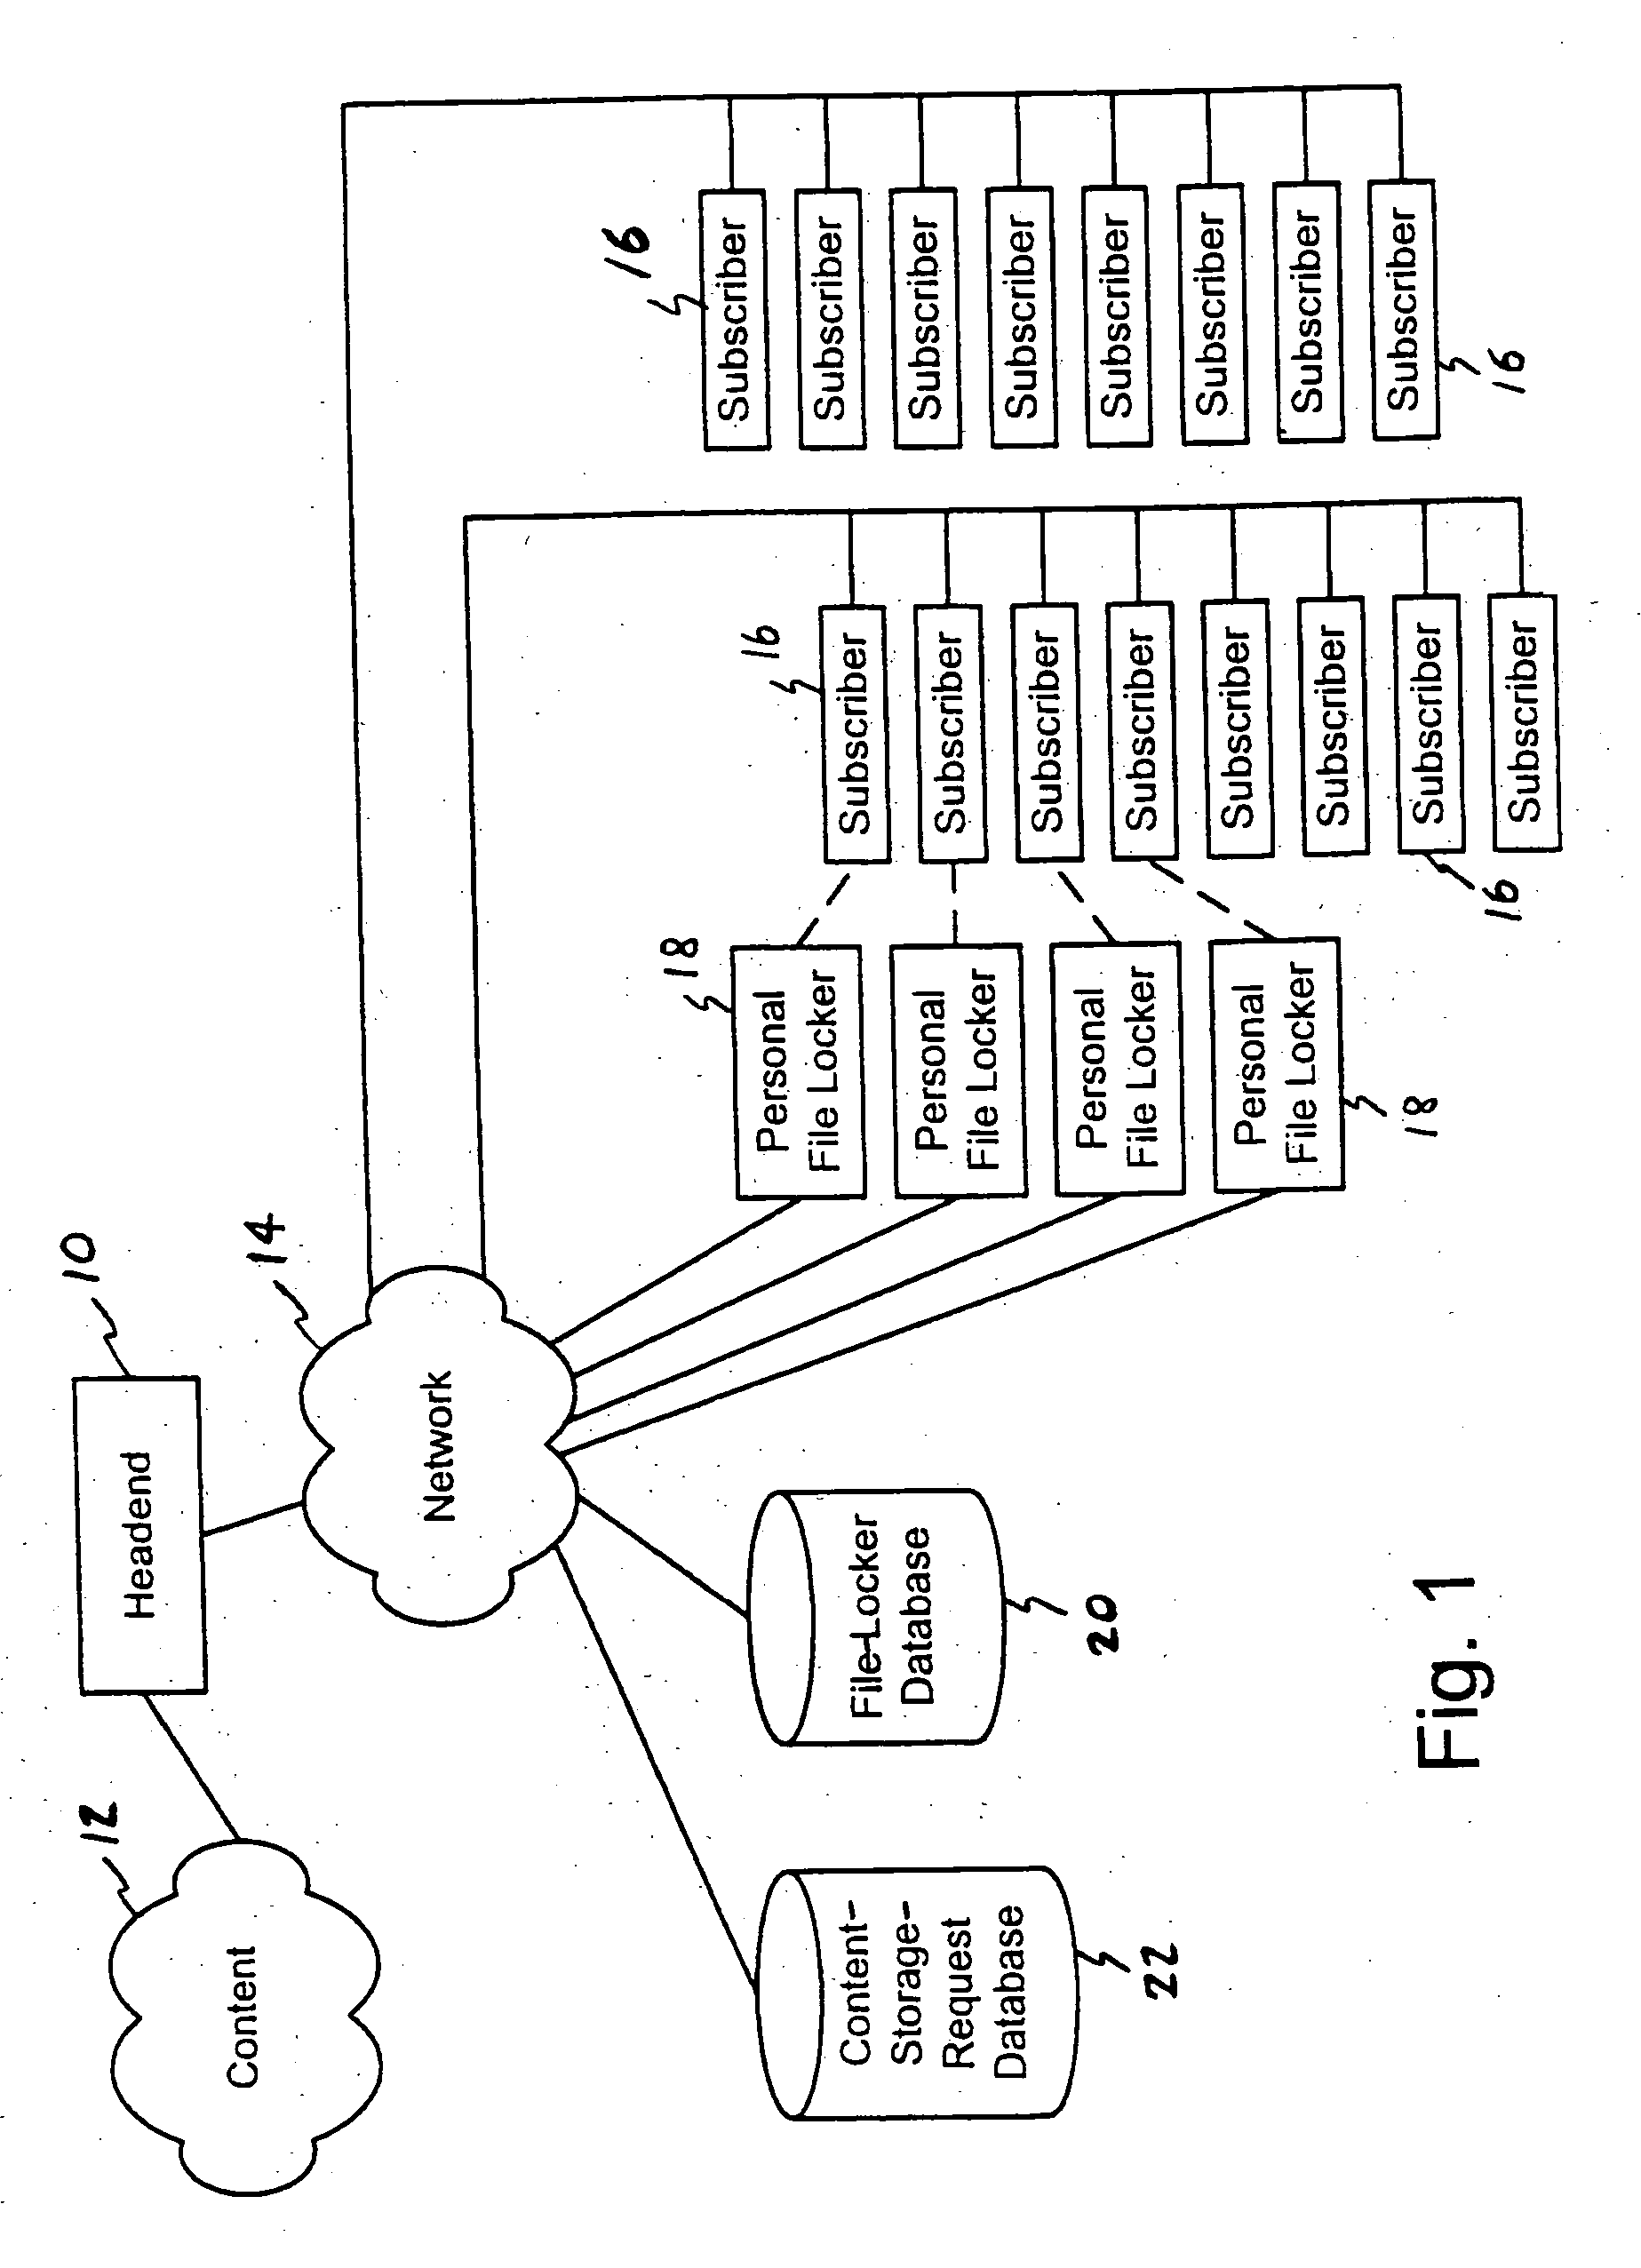 Content storage method and system